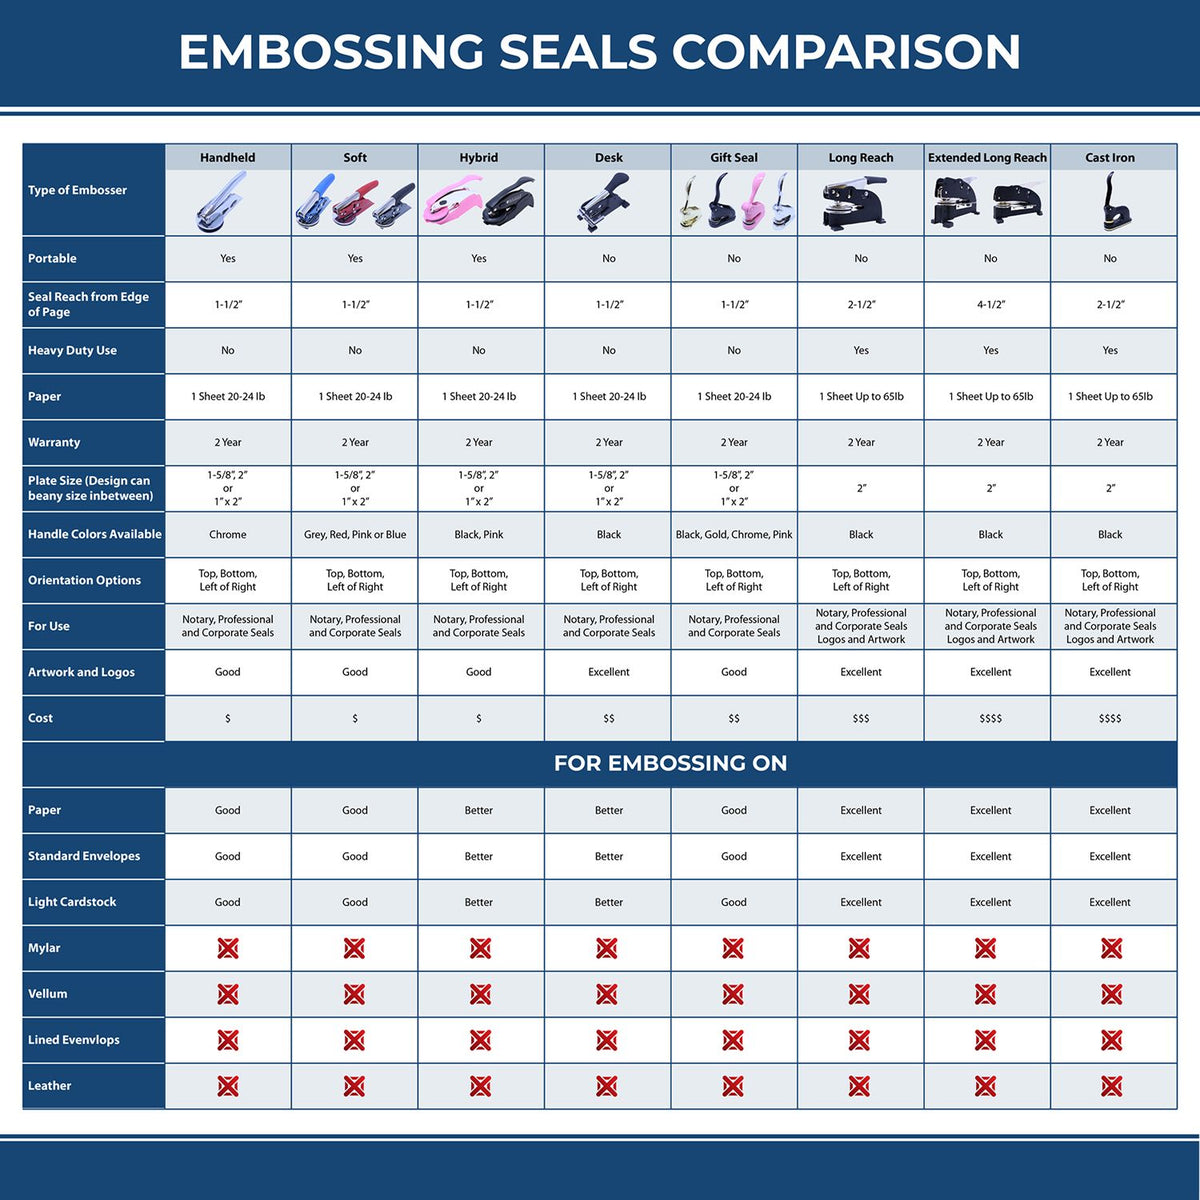 A comparison chart for the different types of mount models available for the Gift Michigan Landscape Architect Seal